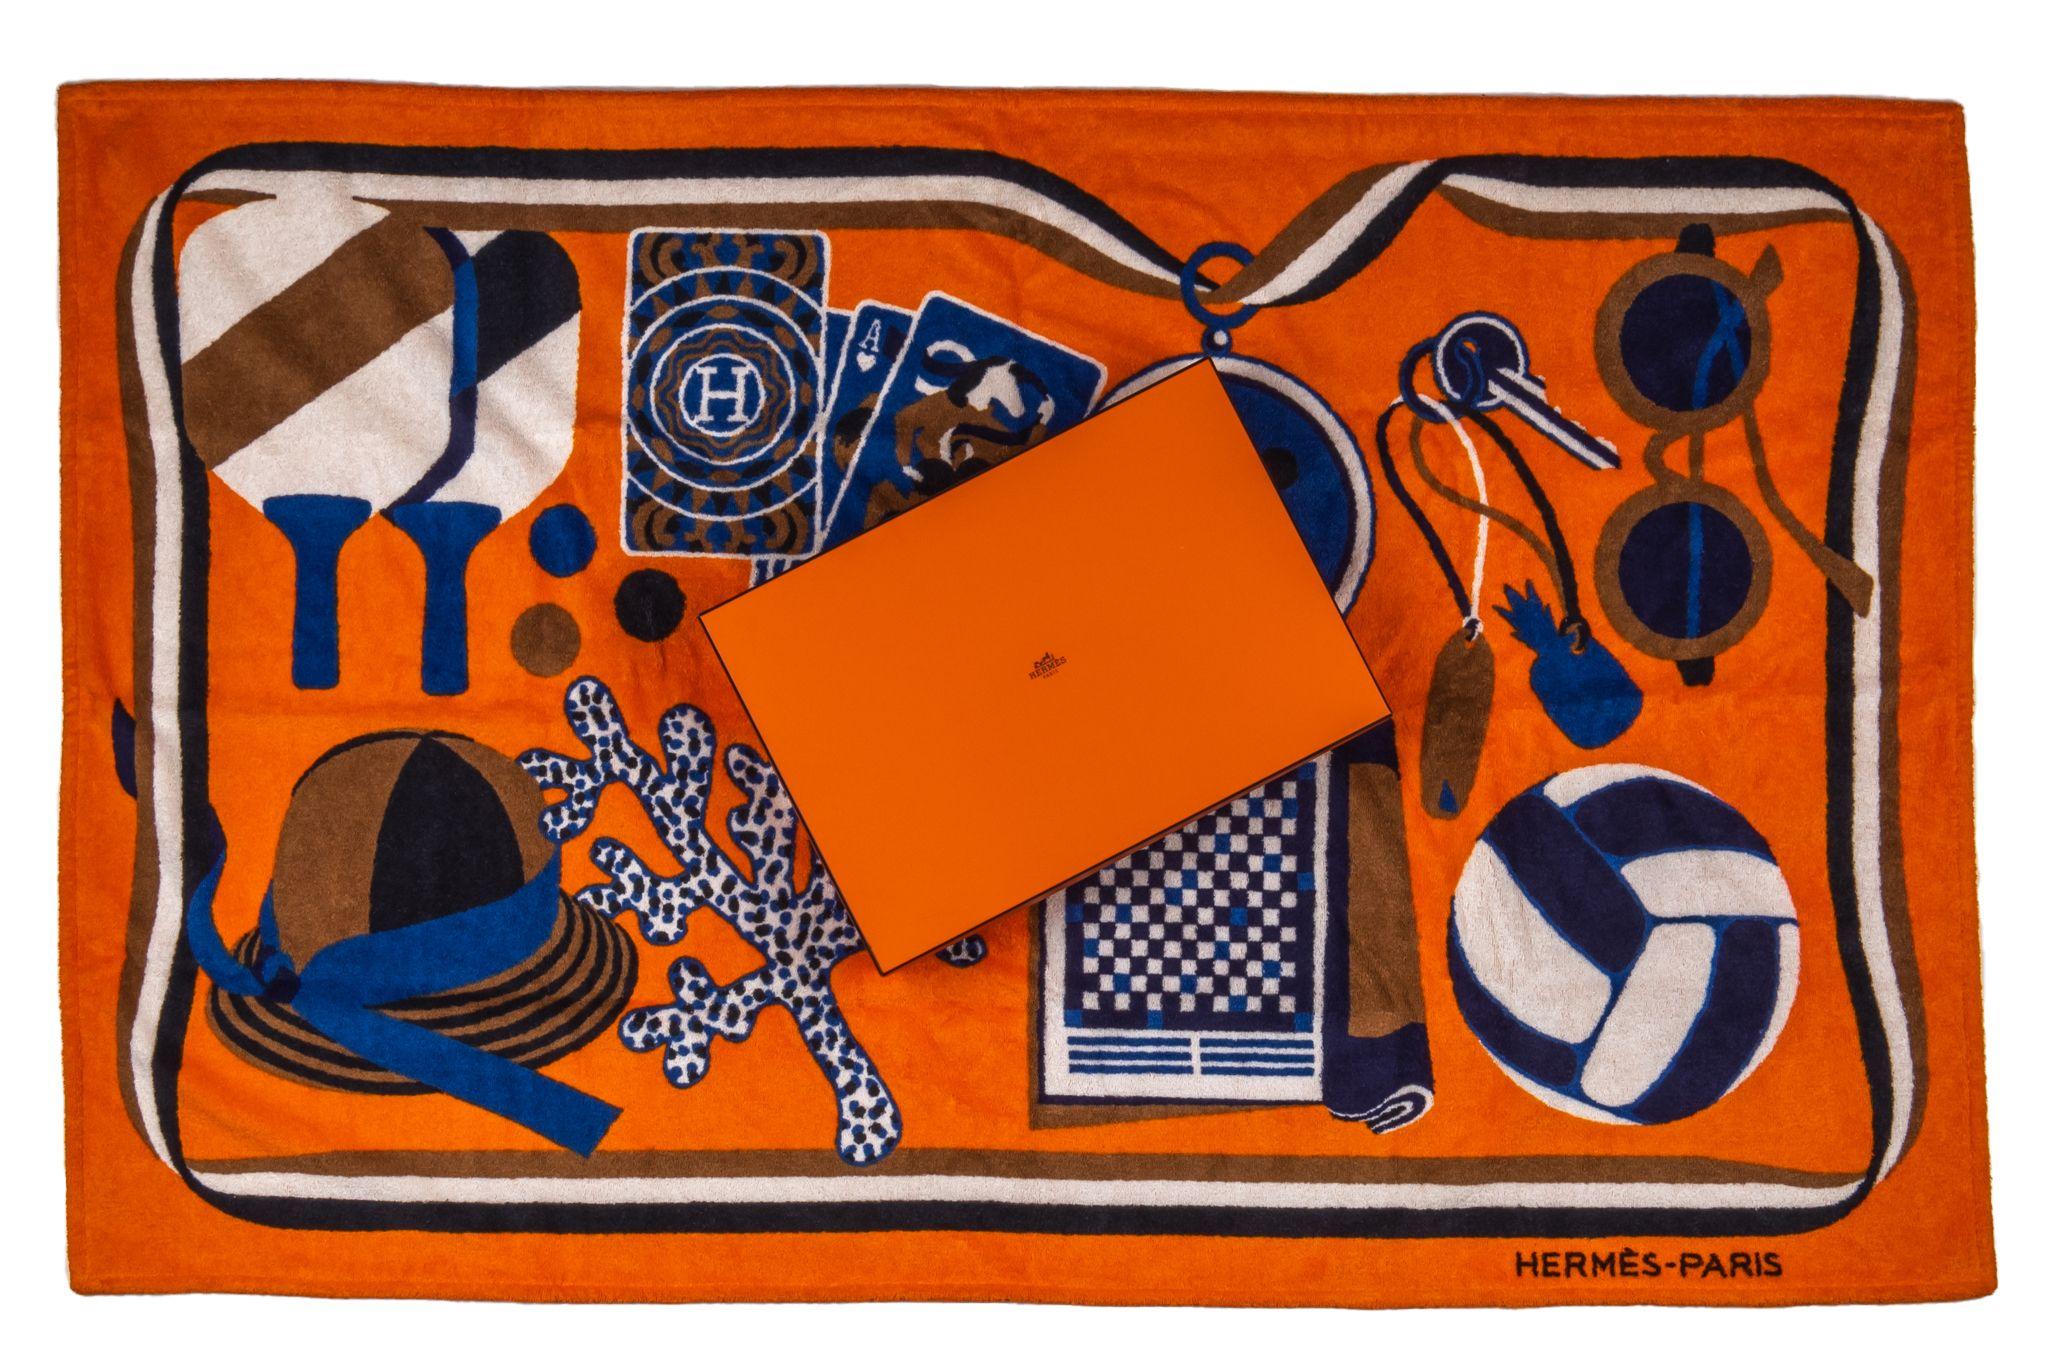 Hermès Beach Towel in orange. The pattern features the necessities for a beach day like a hat, headphones and sun glasses. The item is new and come in the box.